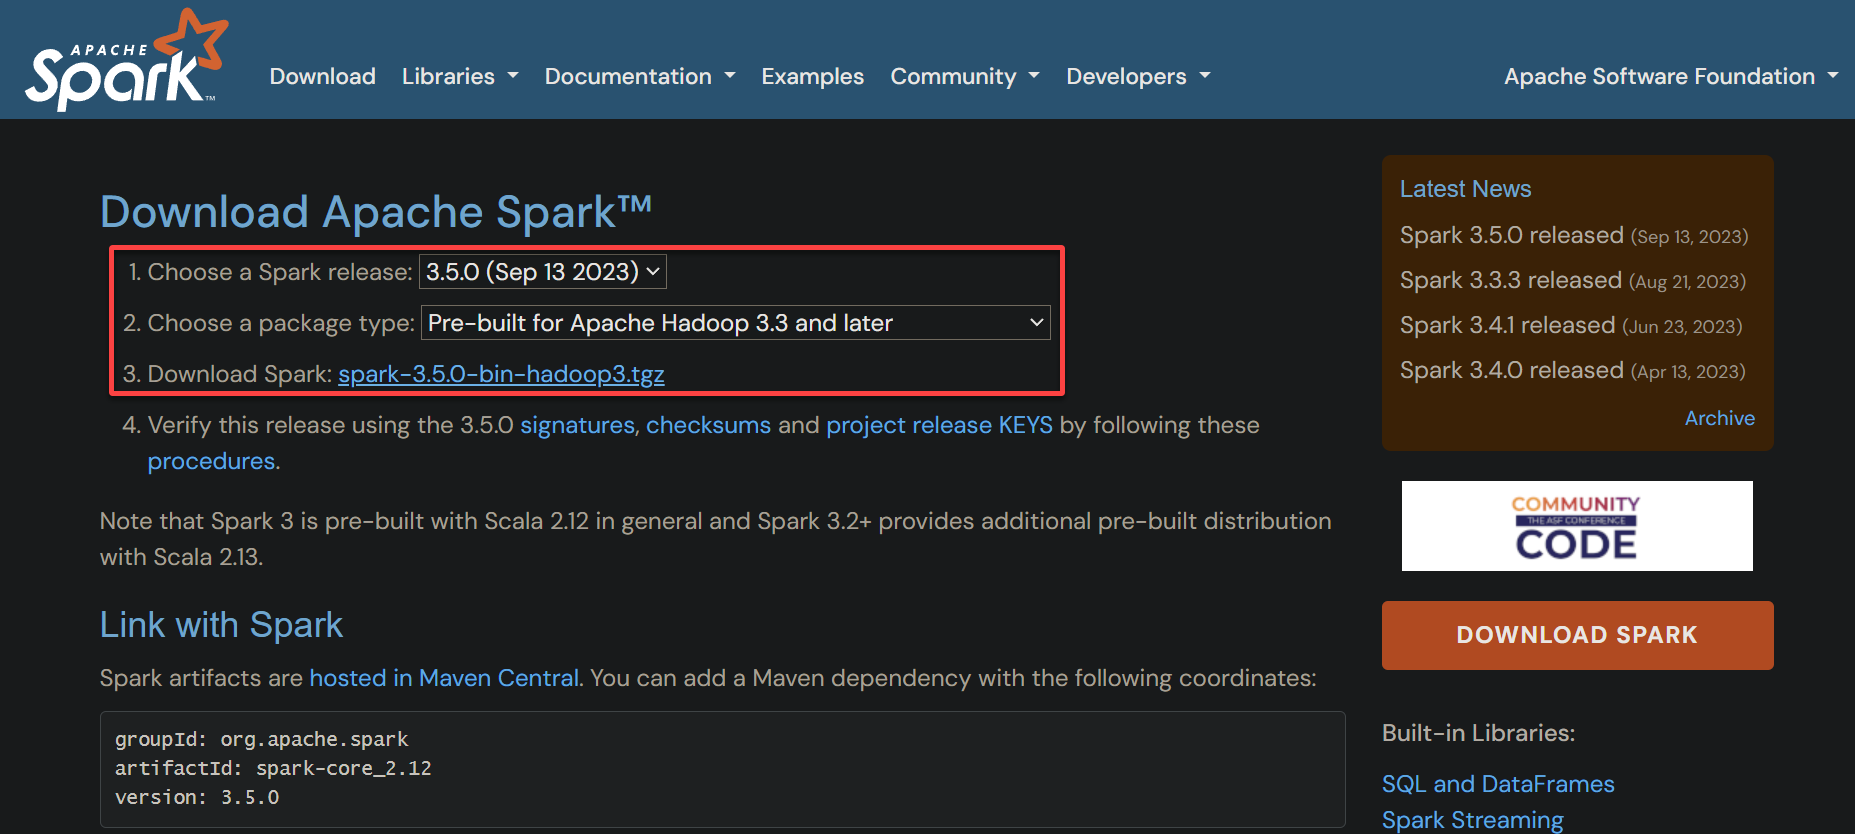 Choosing options for downloading Apache Spark